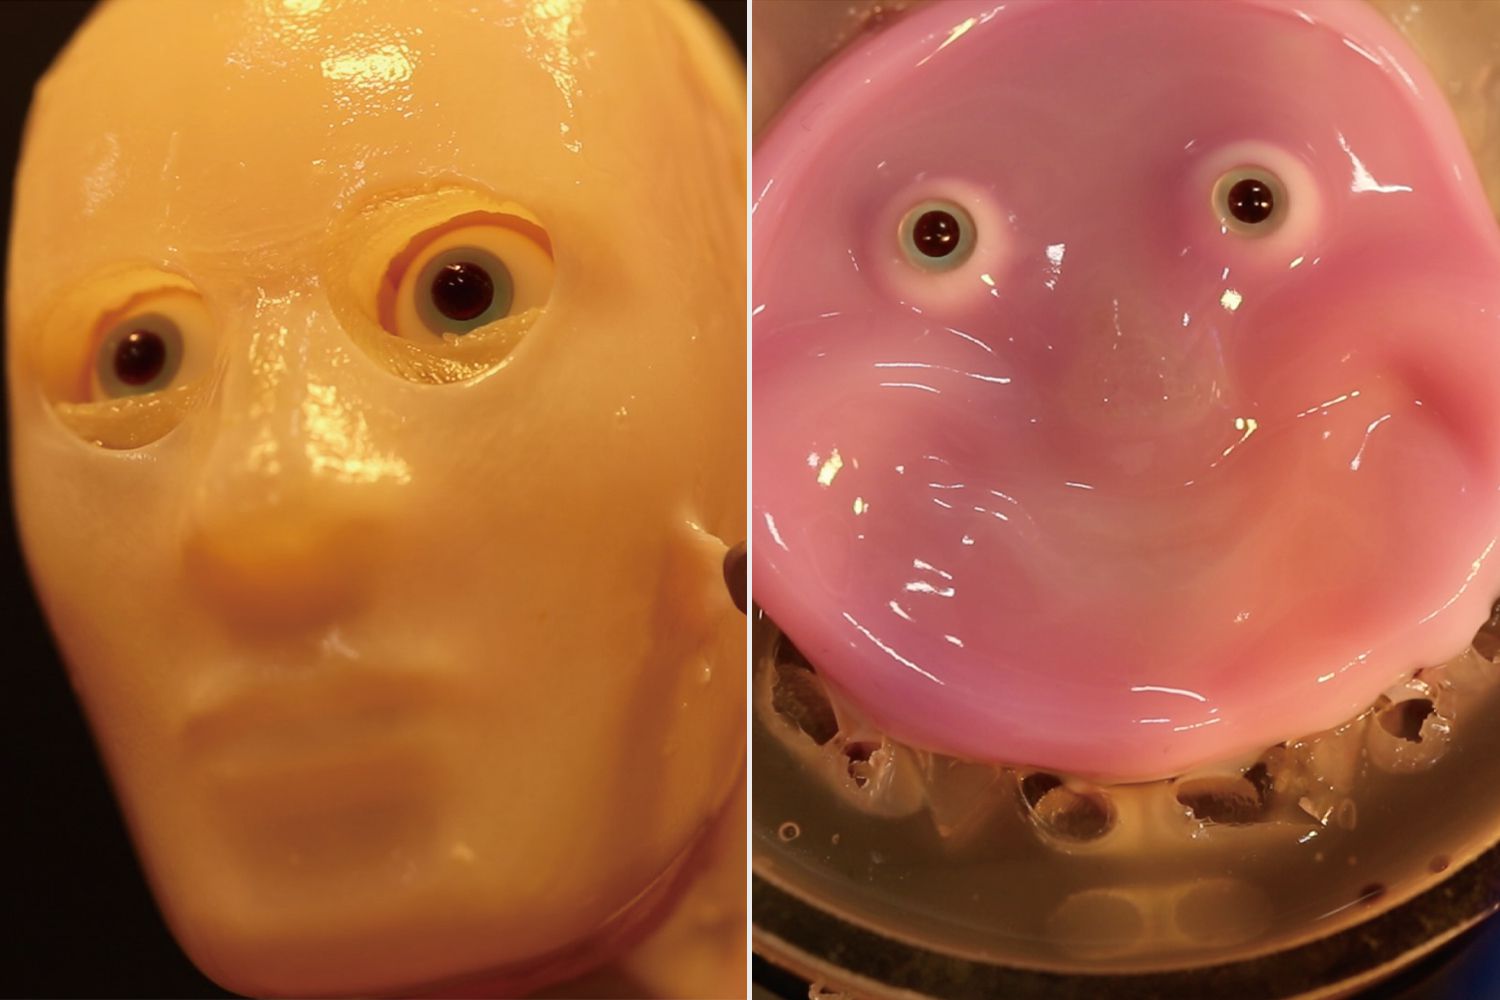 Japanese Scientists Create Smiling Robot with ‘Living’ Skin Using Collagen [Video]